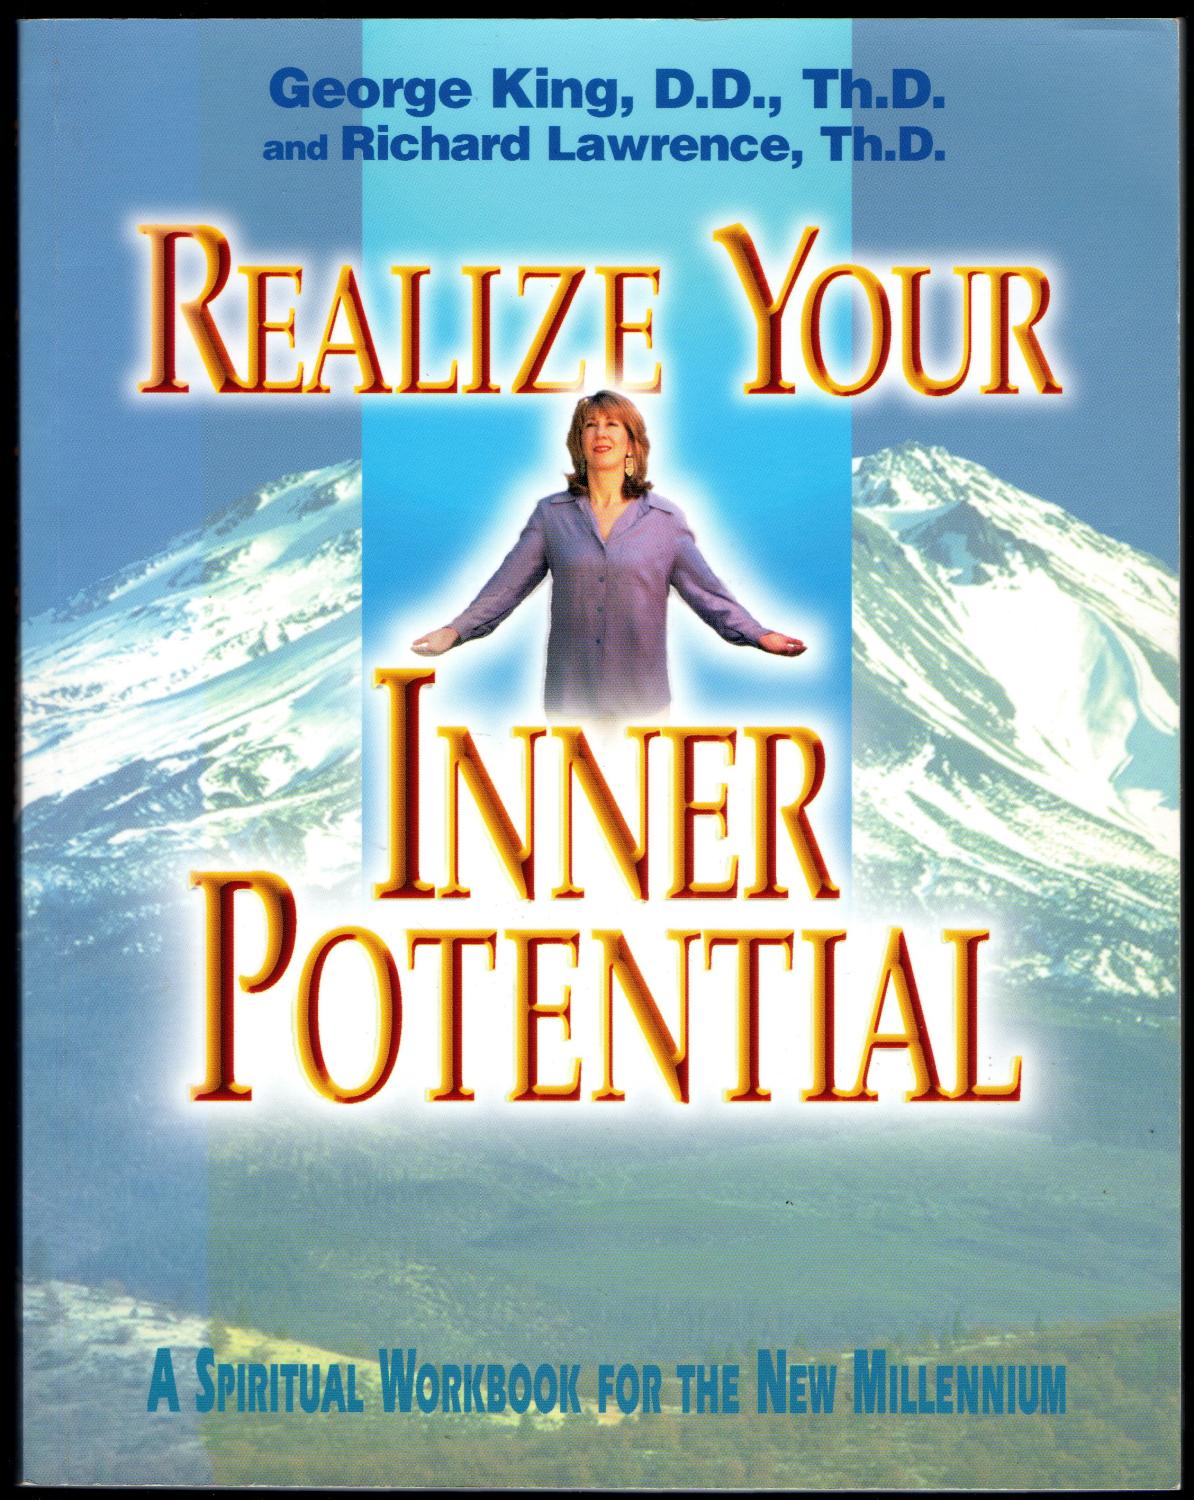 Realize Your Inner Potential - A Spiritual Workbook for the New Millennium - George King, D.D.,Th.D. And Richard Lawrence, Th.D.